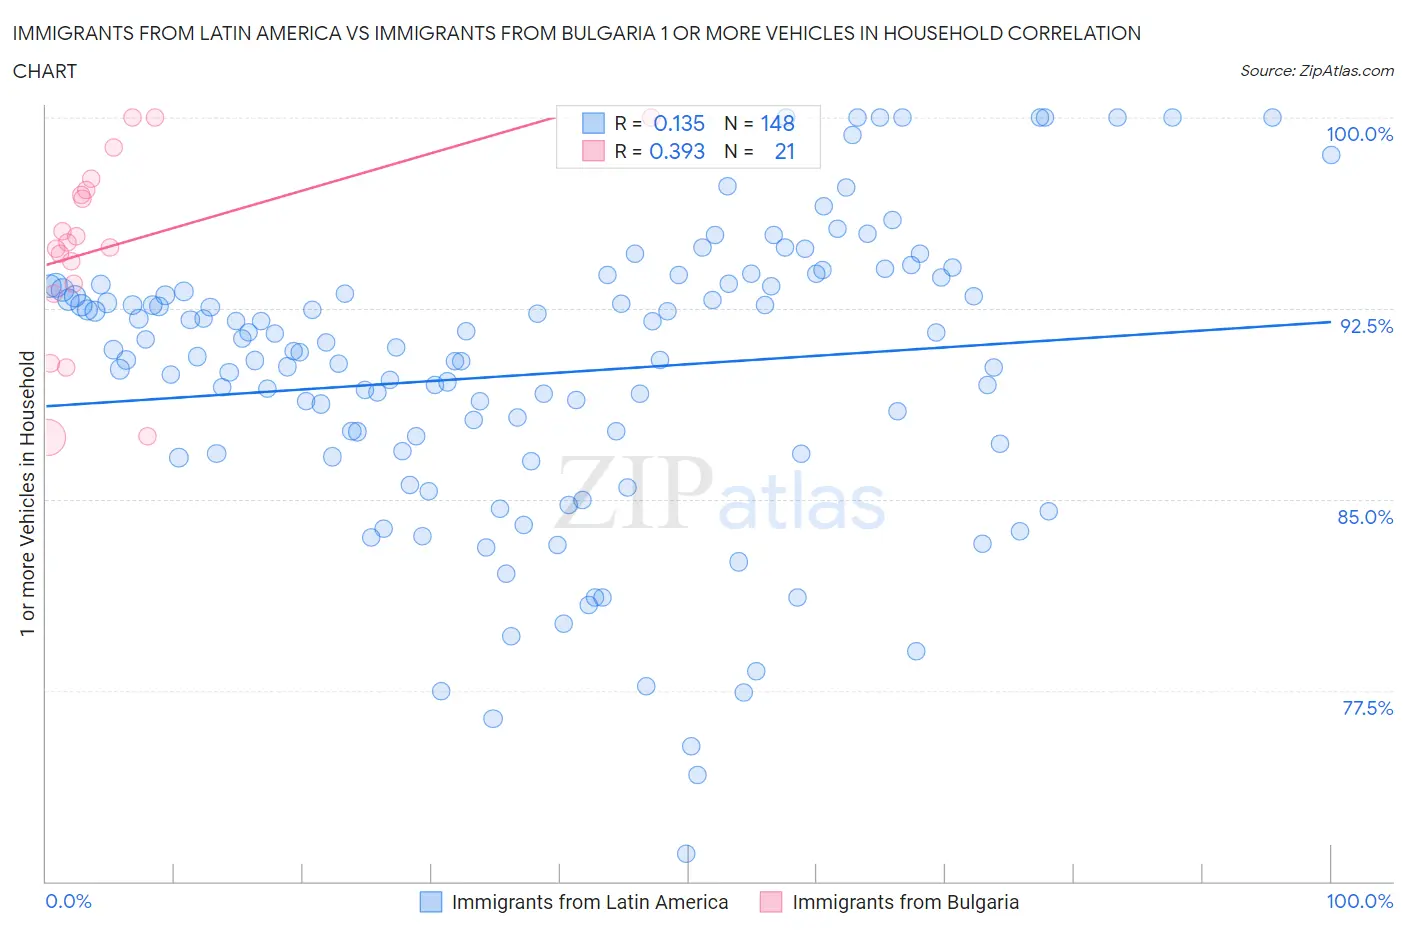 Immigrants from Latin America vs Immigrants from Bulgaria 1 or more Vehicles in Household